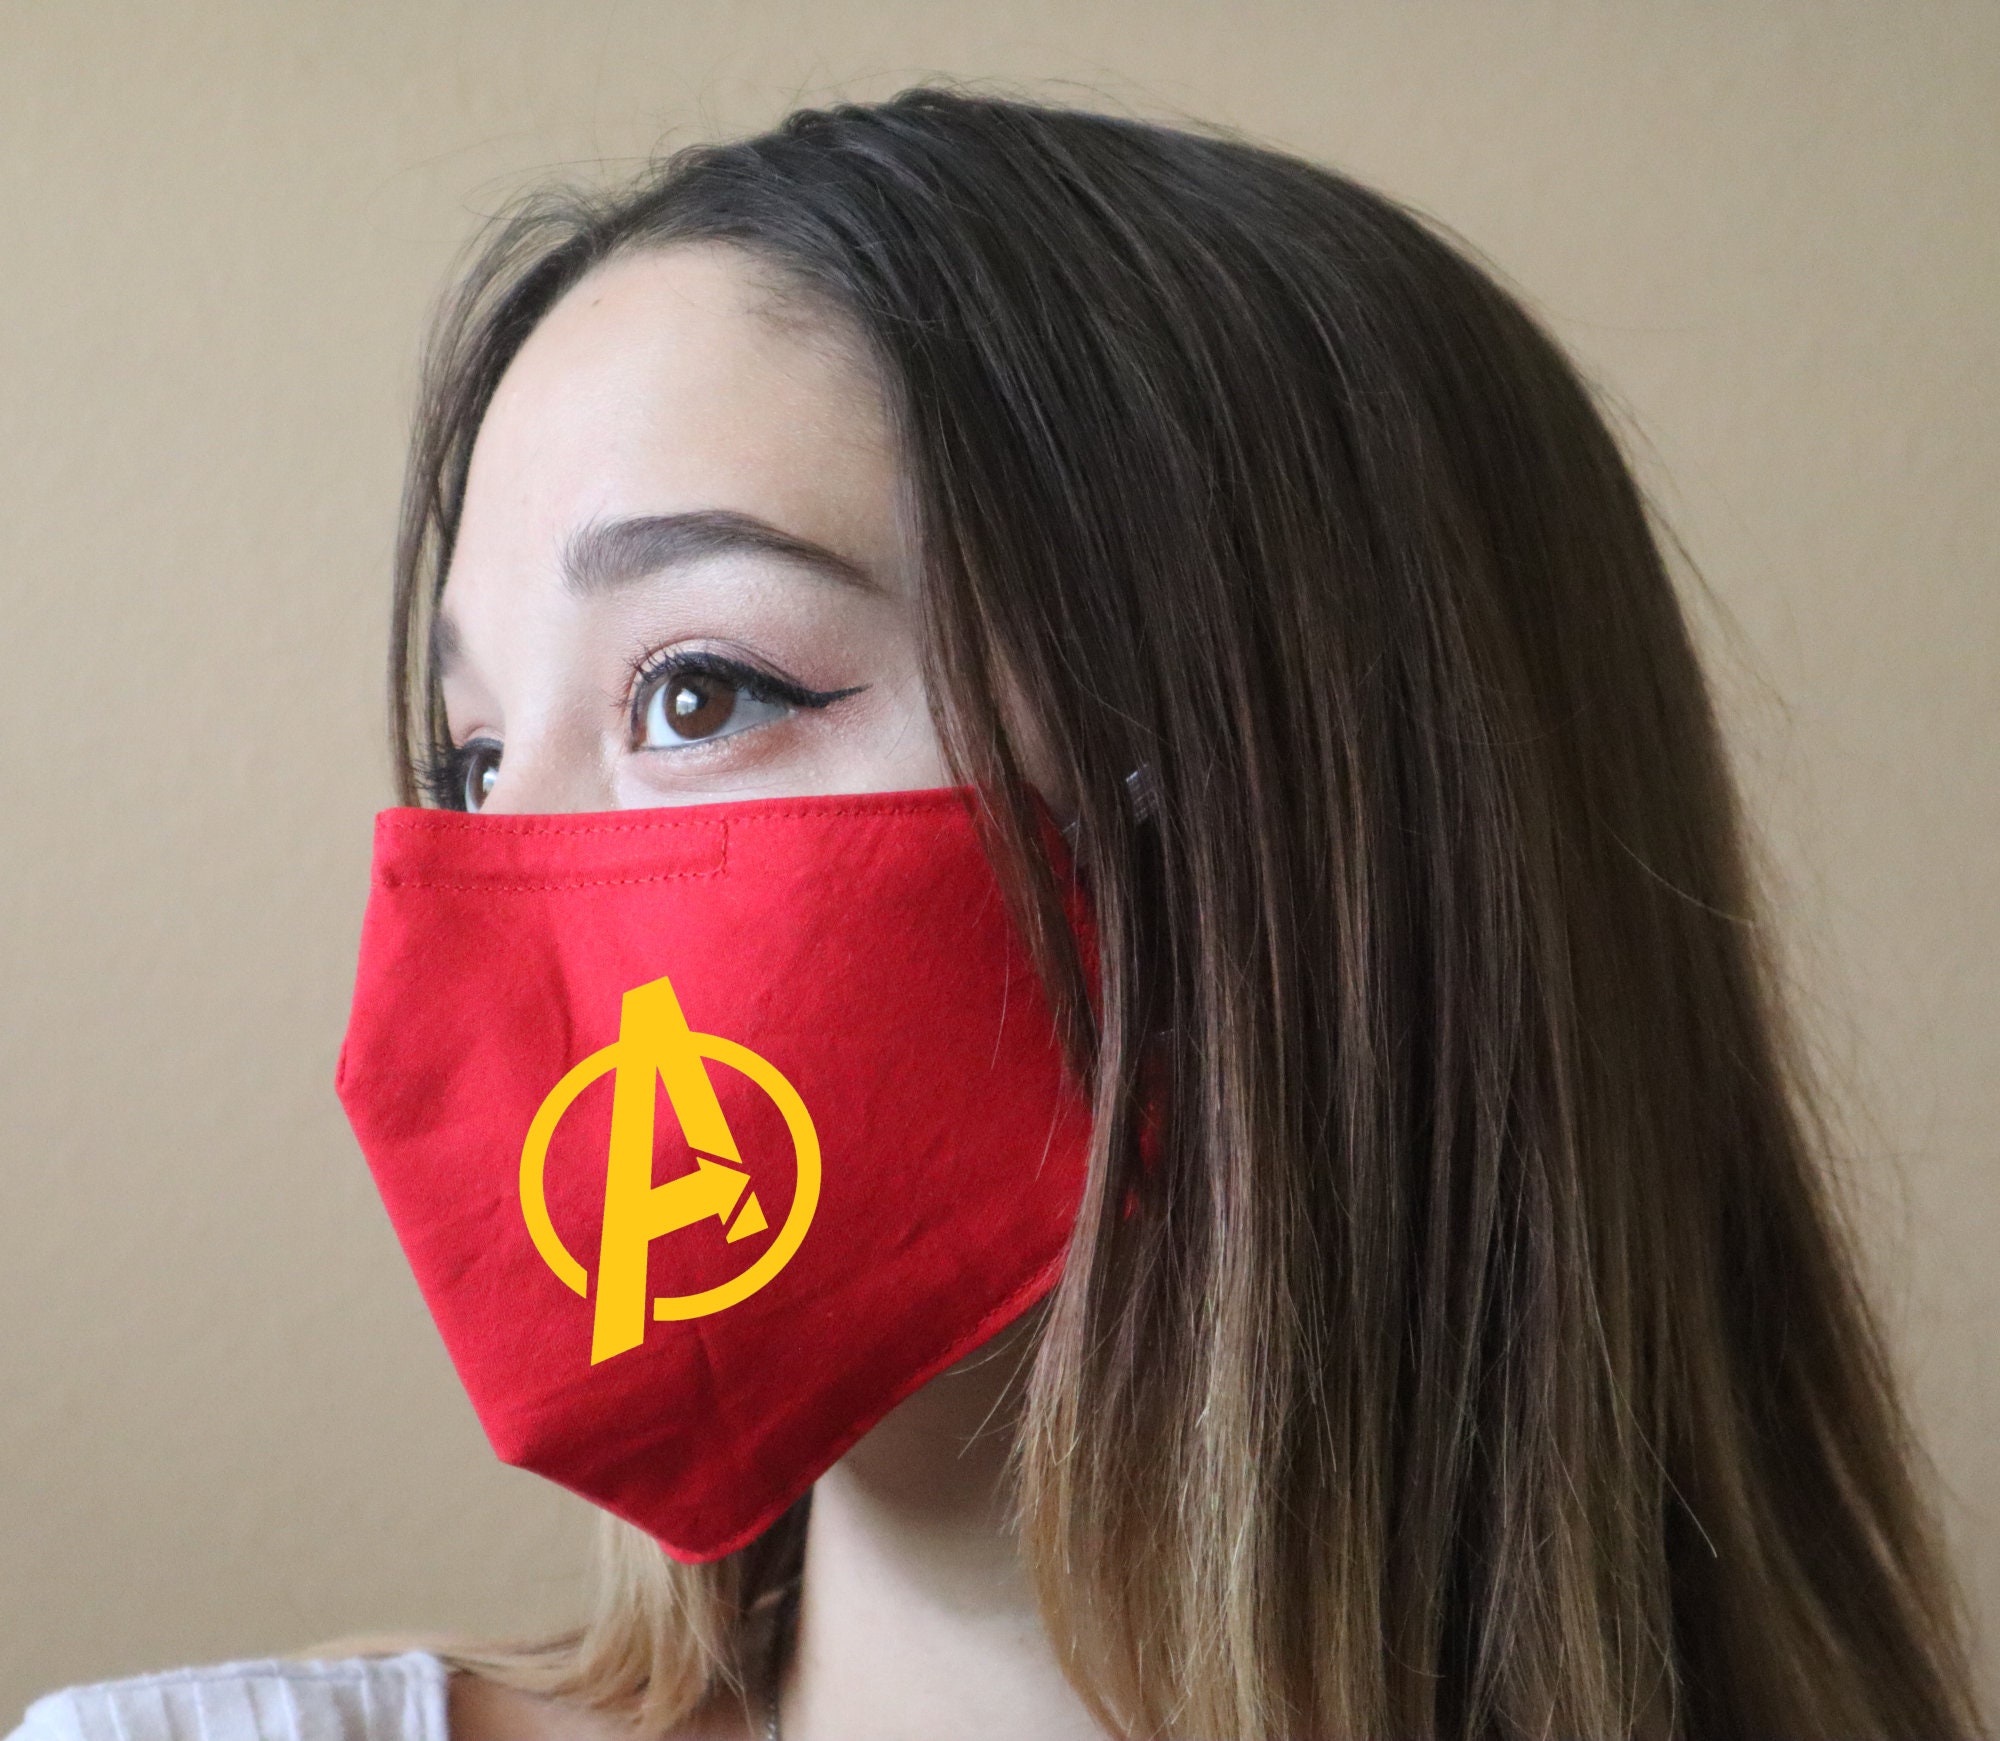 Handmade Cotton Blend Customizable Face Masks With Adjustable Ear-Loops - Super Heroes- Avengers Adult Large 10 X 6.5"